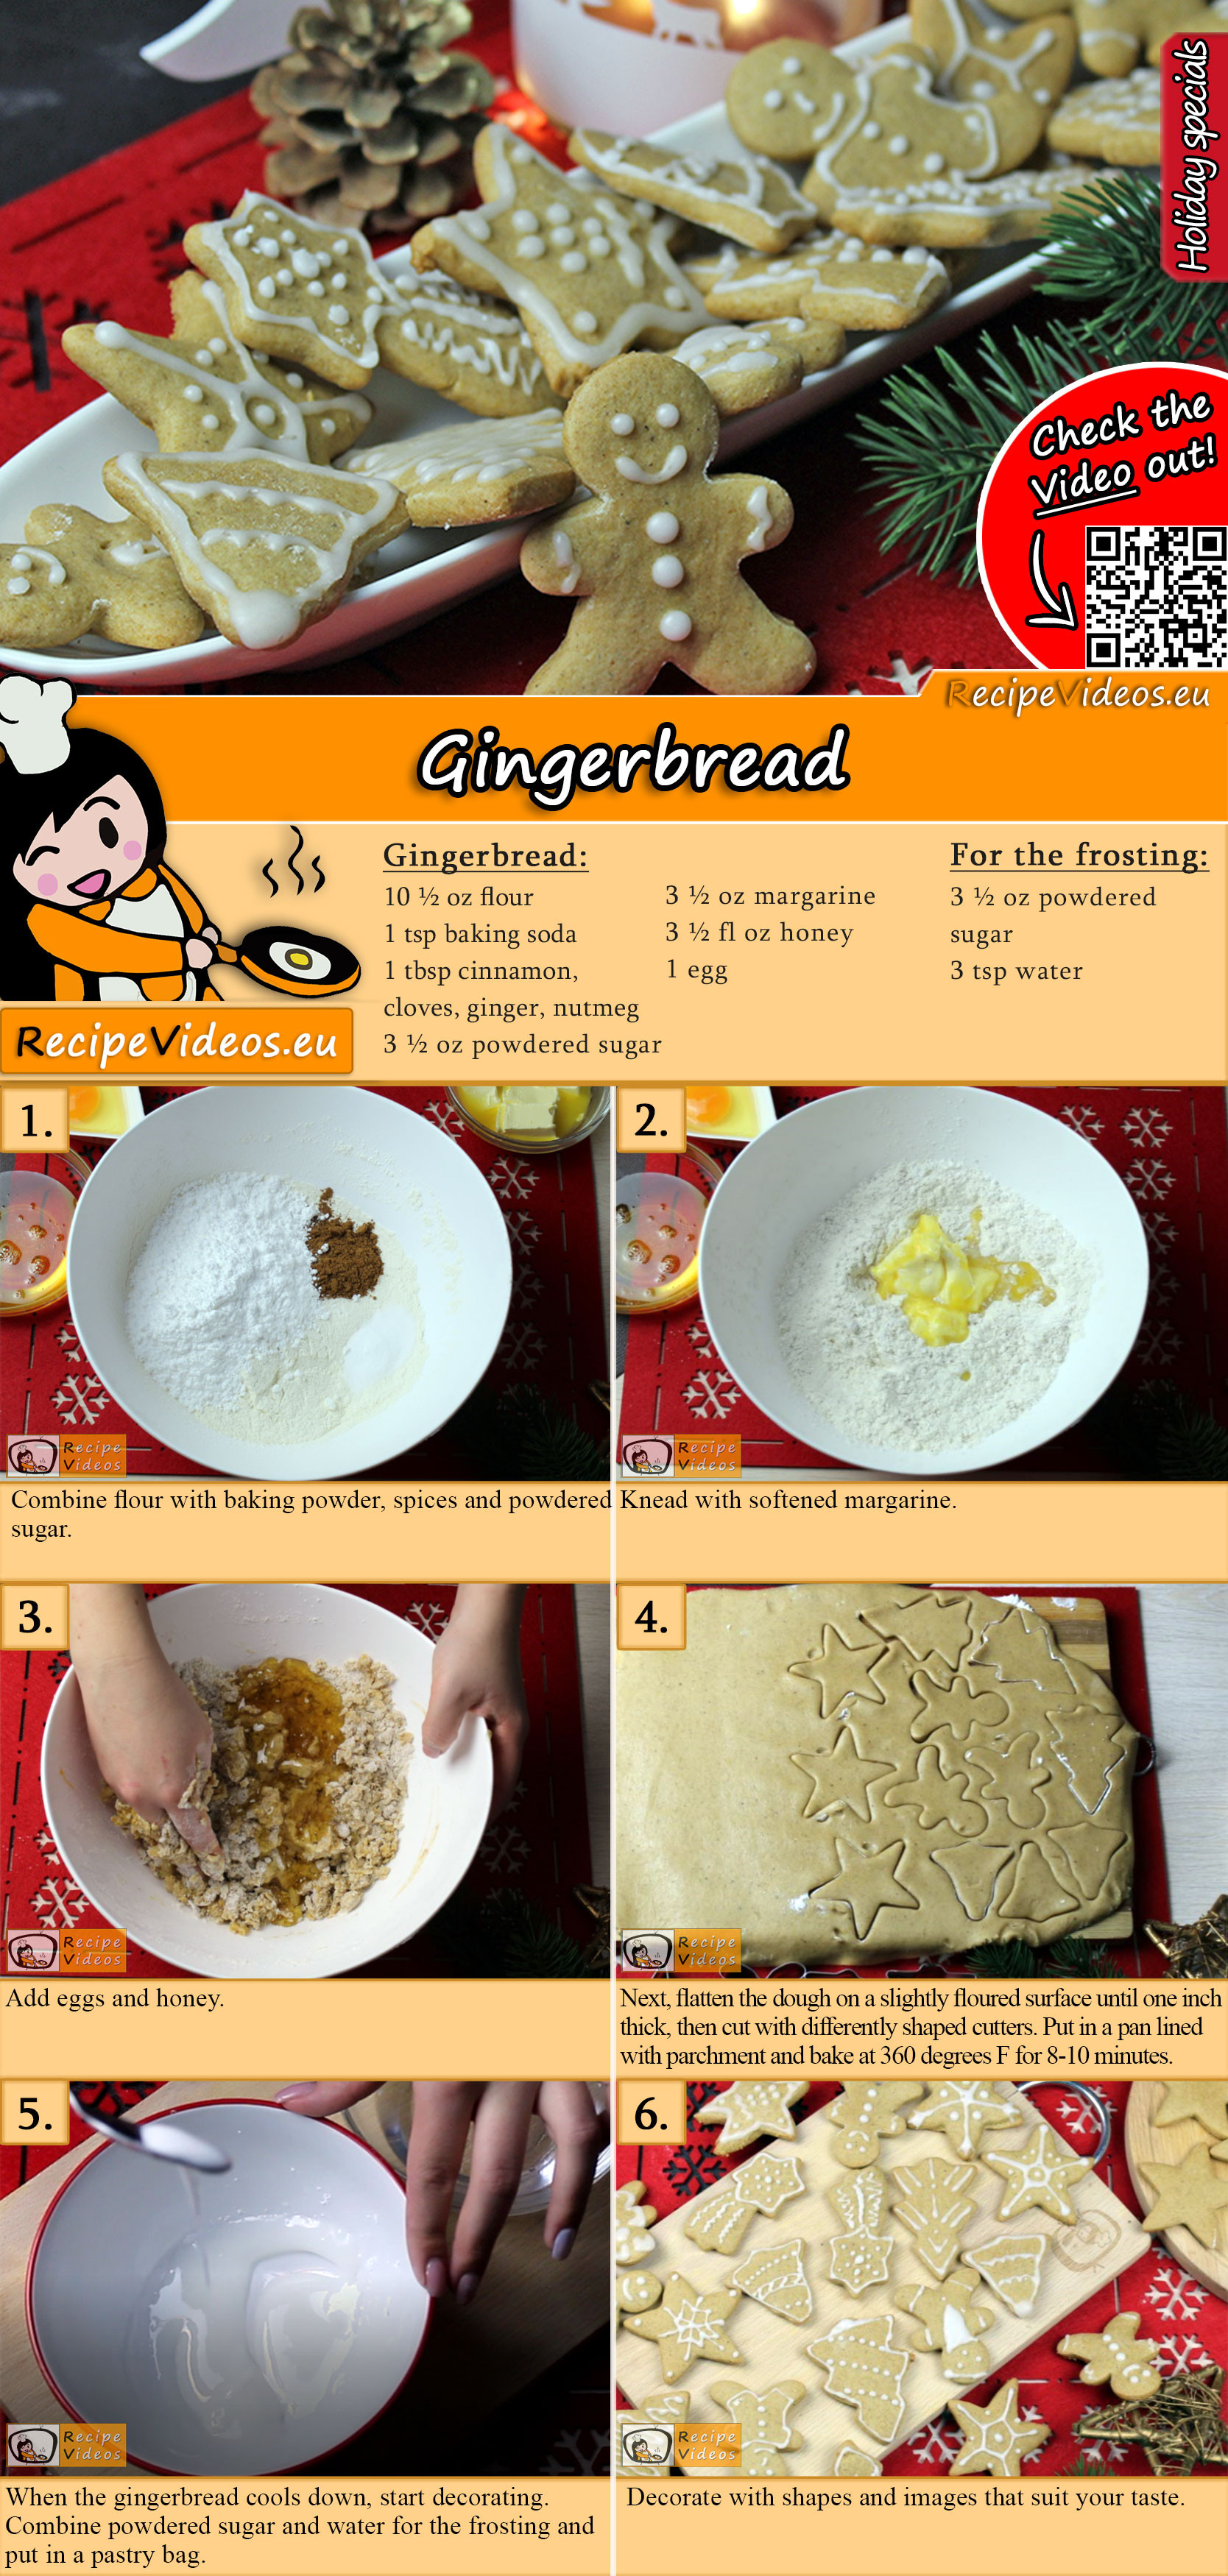 Gingerbread recipe with video